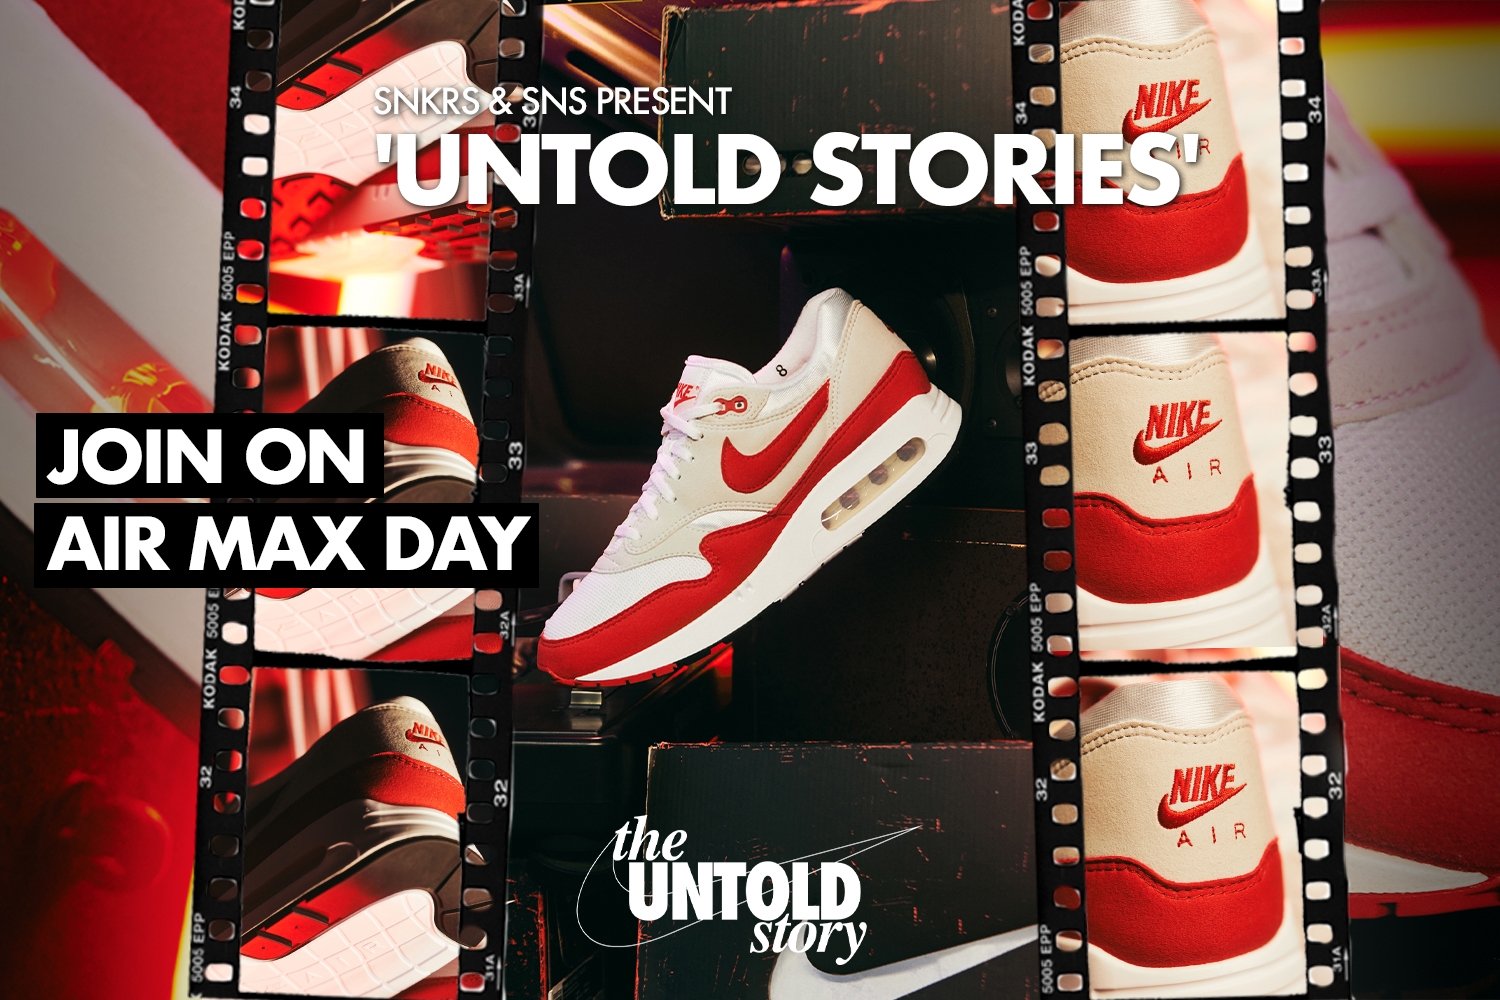 Nike 'Untold Stories' event in Paris during Air Max Day